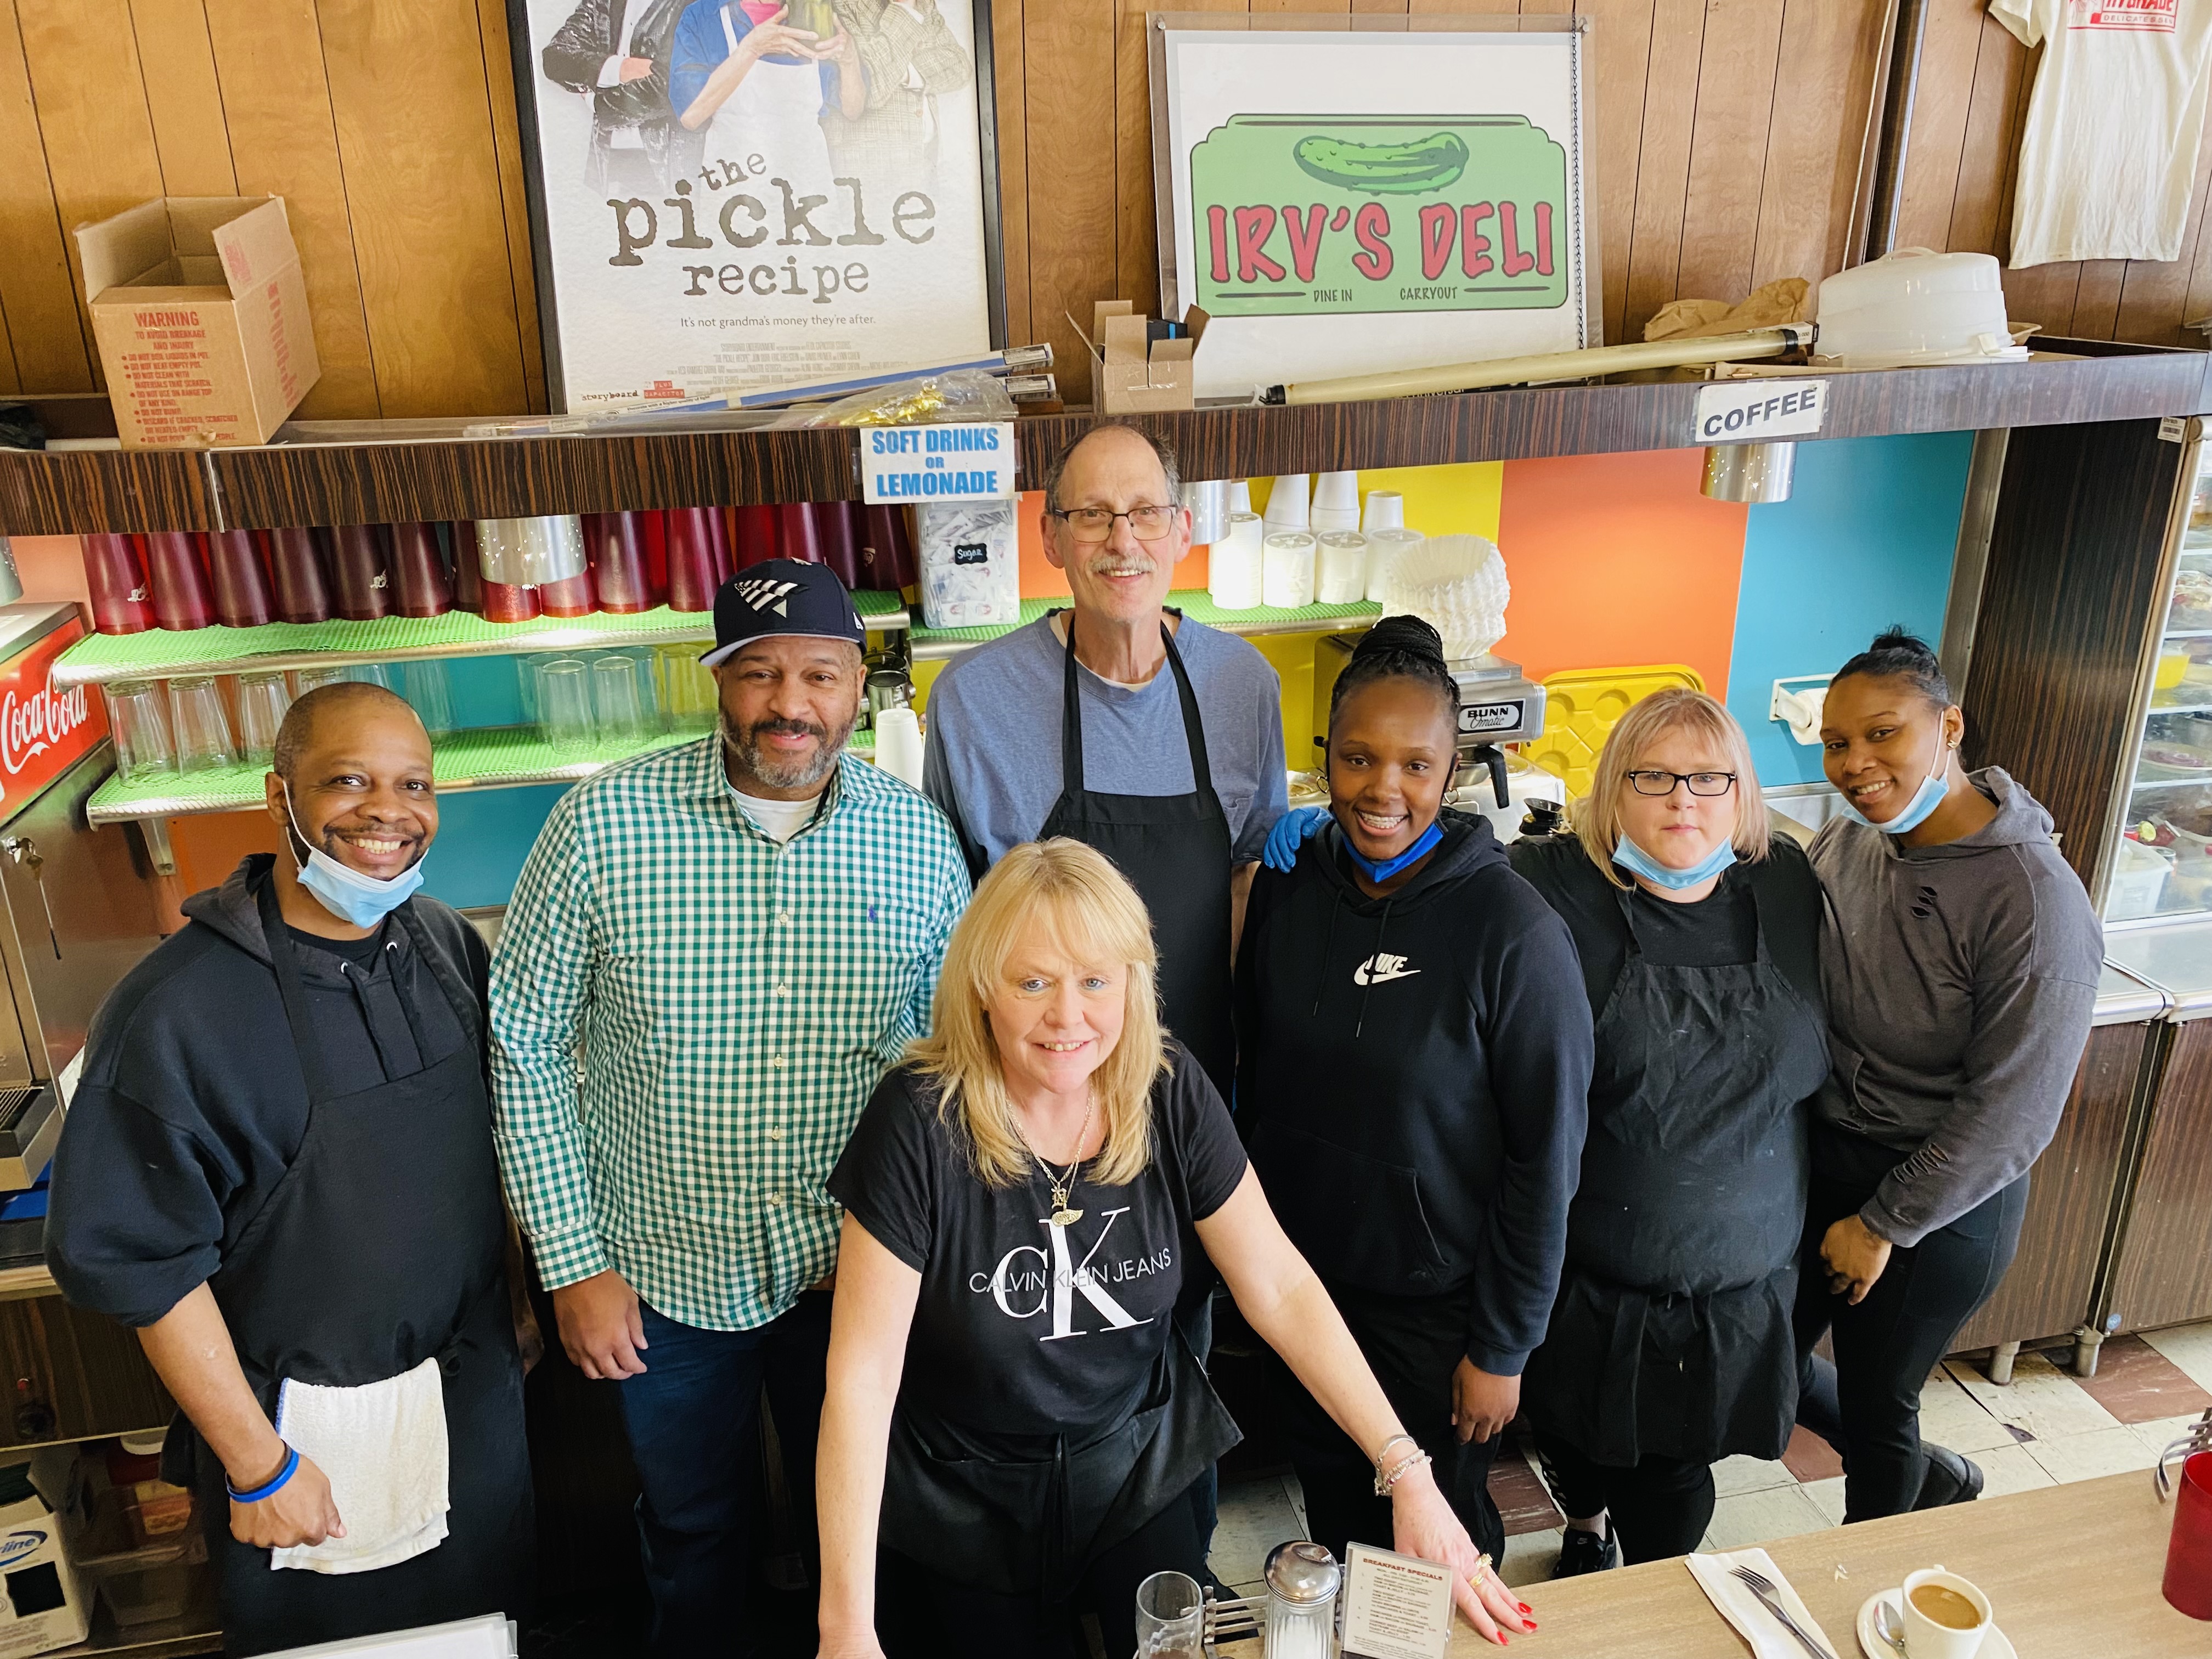 Seven smiling people standing behind the lunch counter at Hygrade Deli in Detroit, Michigan.